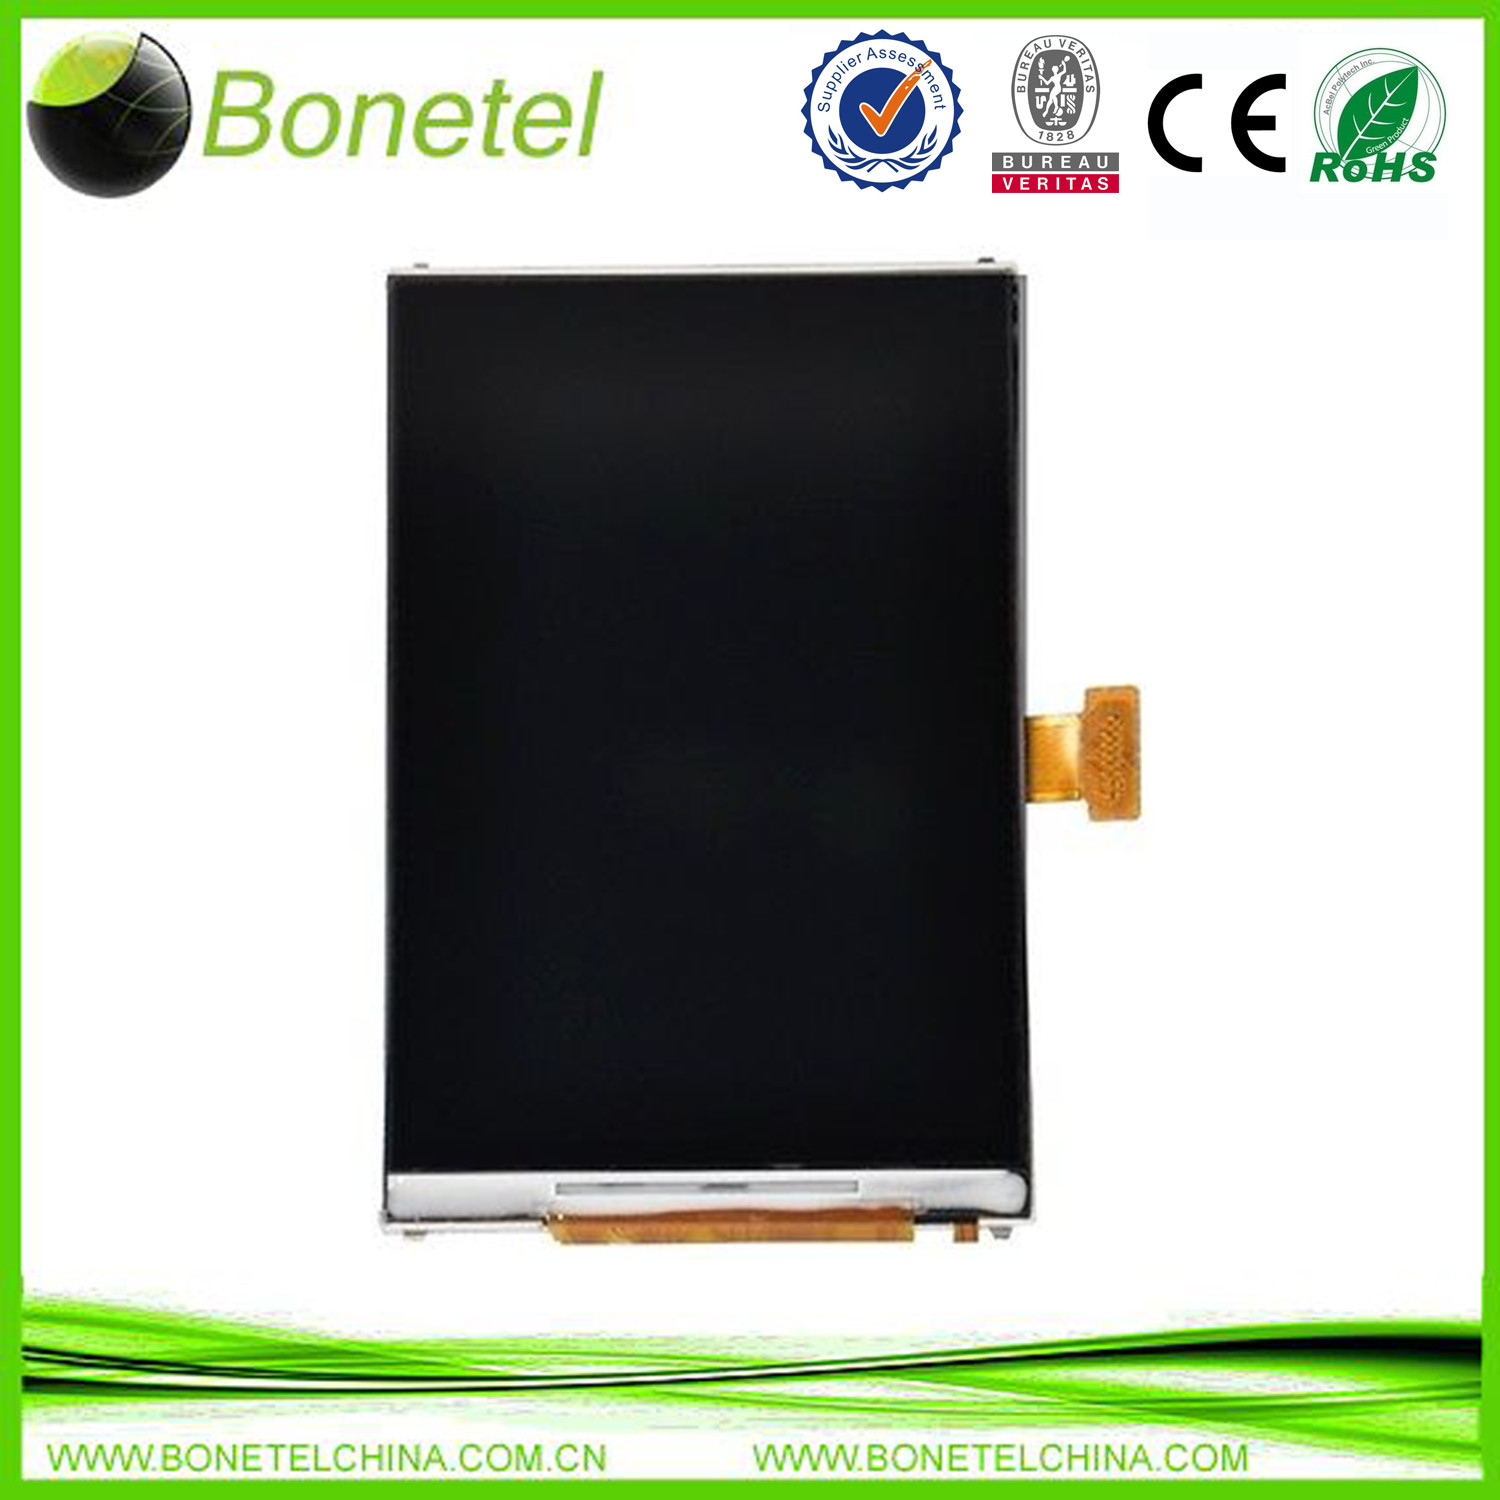 LCD SCREEN for SAMSUNG GALAXY GT S5380 WAWE Y WAWE YOUNG